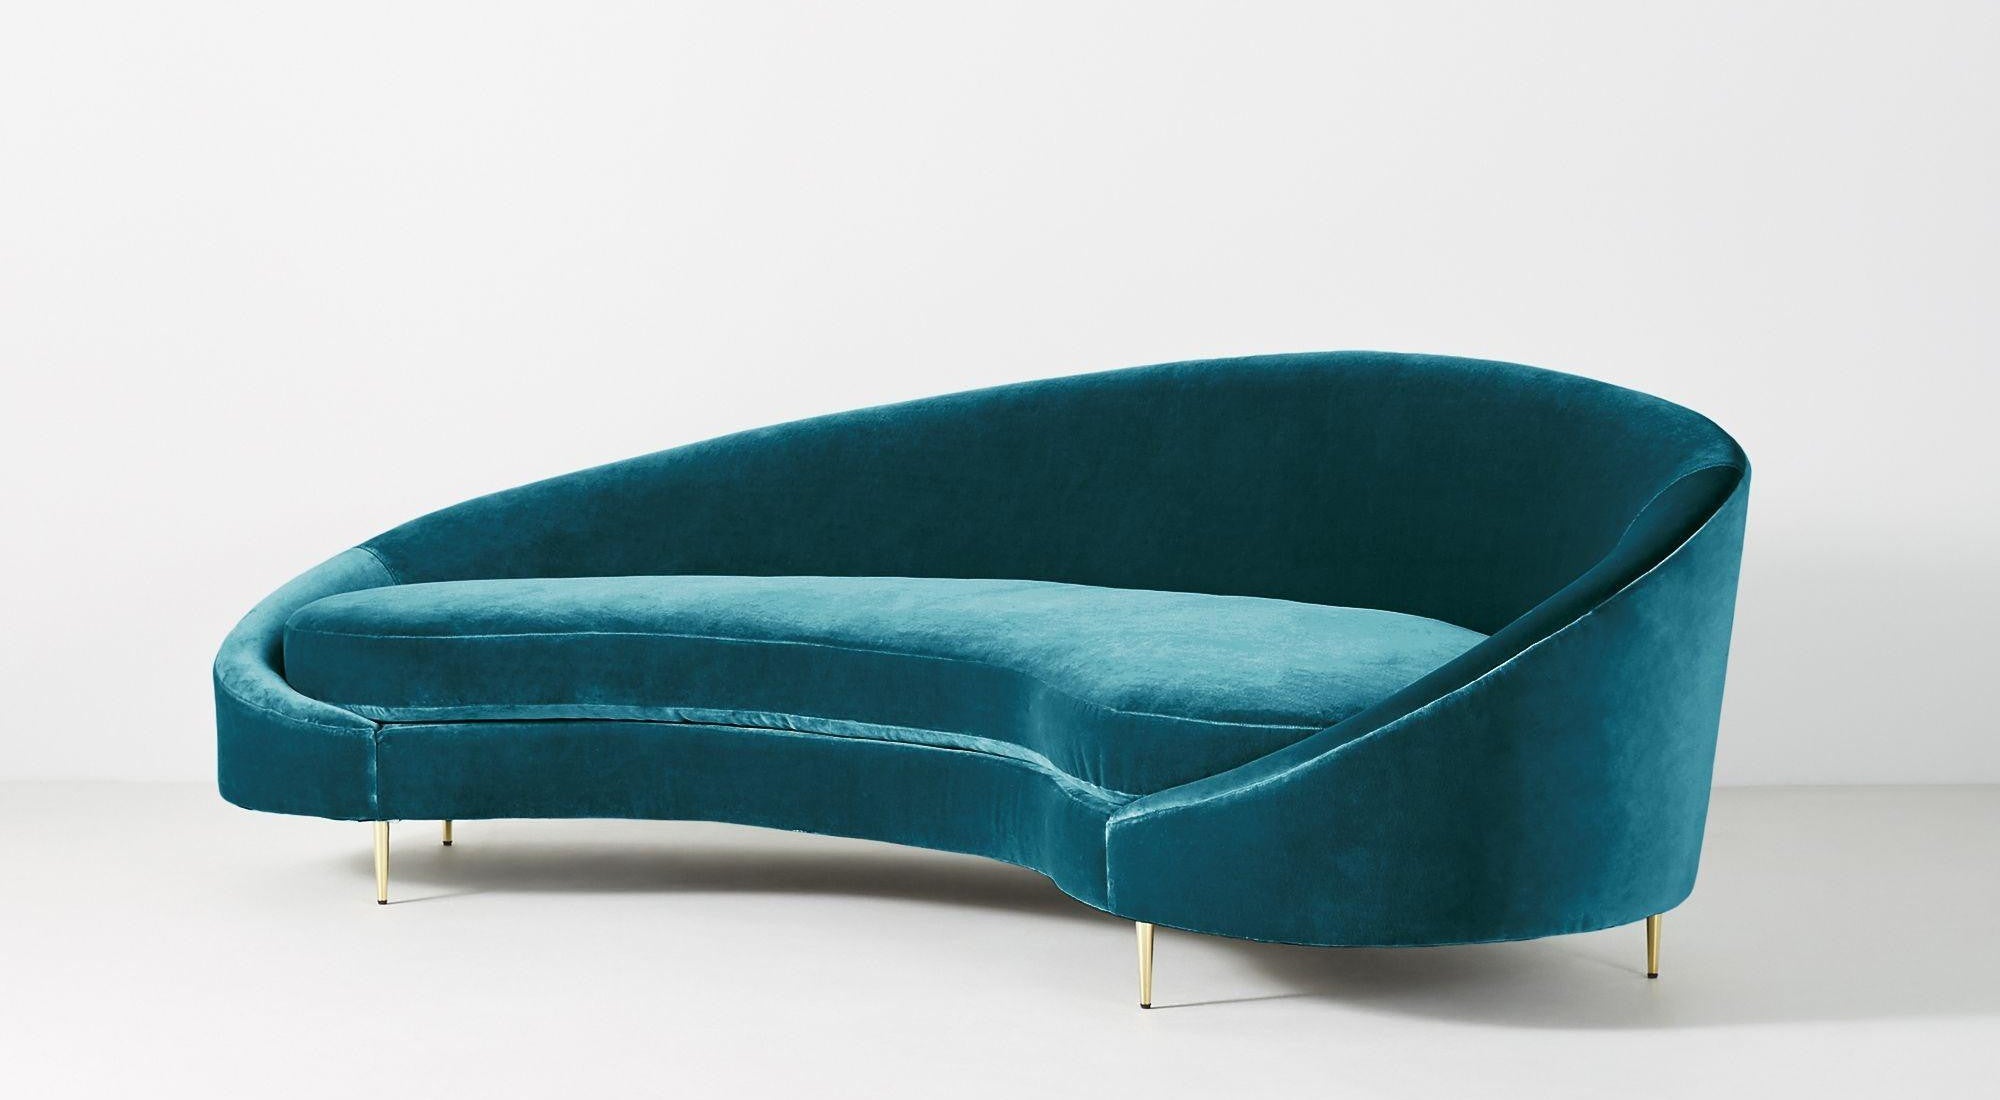 https://daiahome.com/products/gianna-modern-classic-curved-sofa